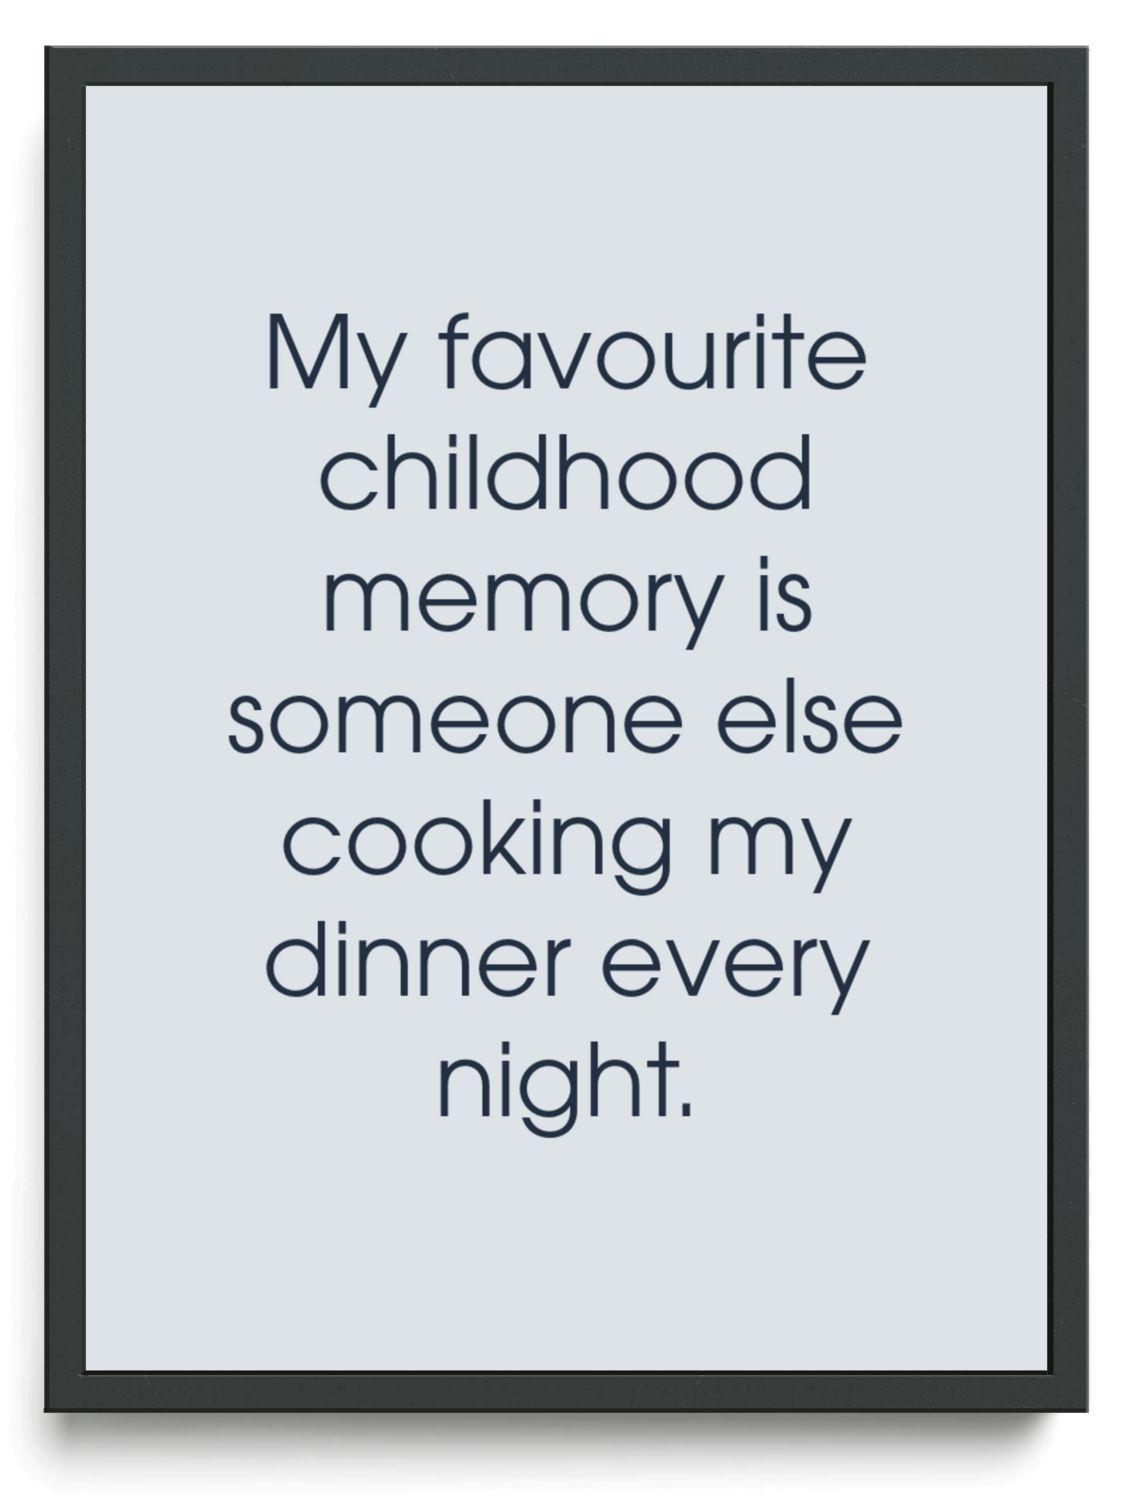 My favourite childhood memory is someone else cooking my dinner every night.